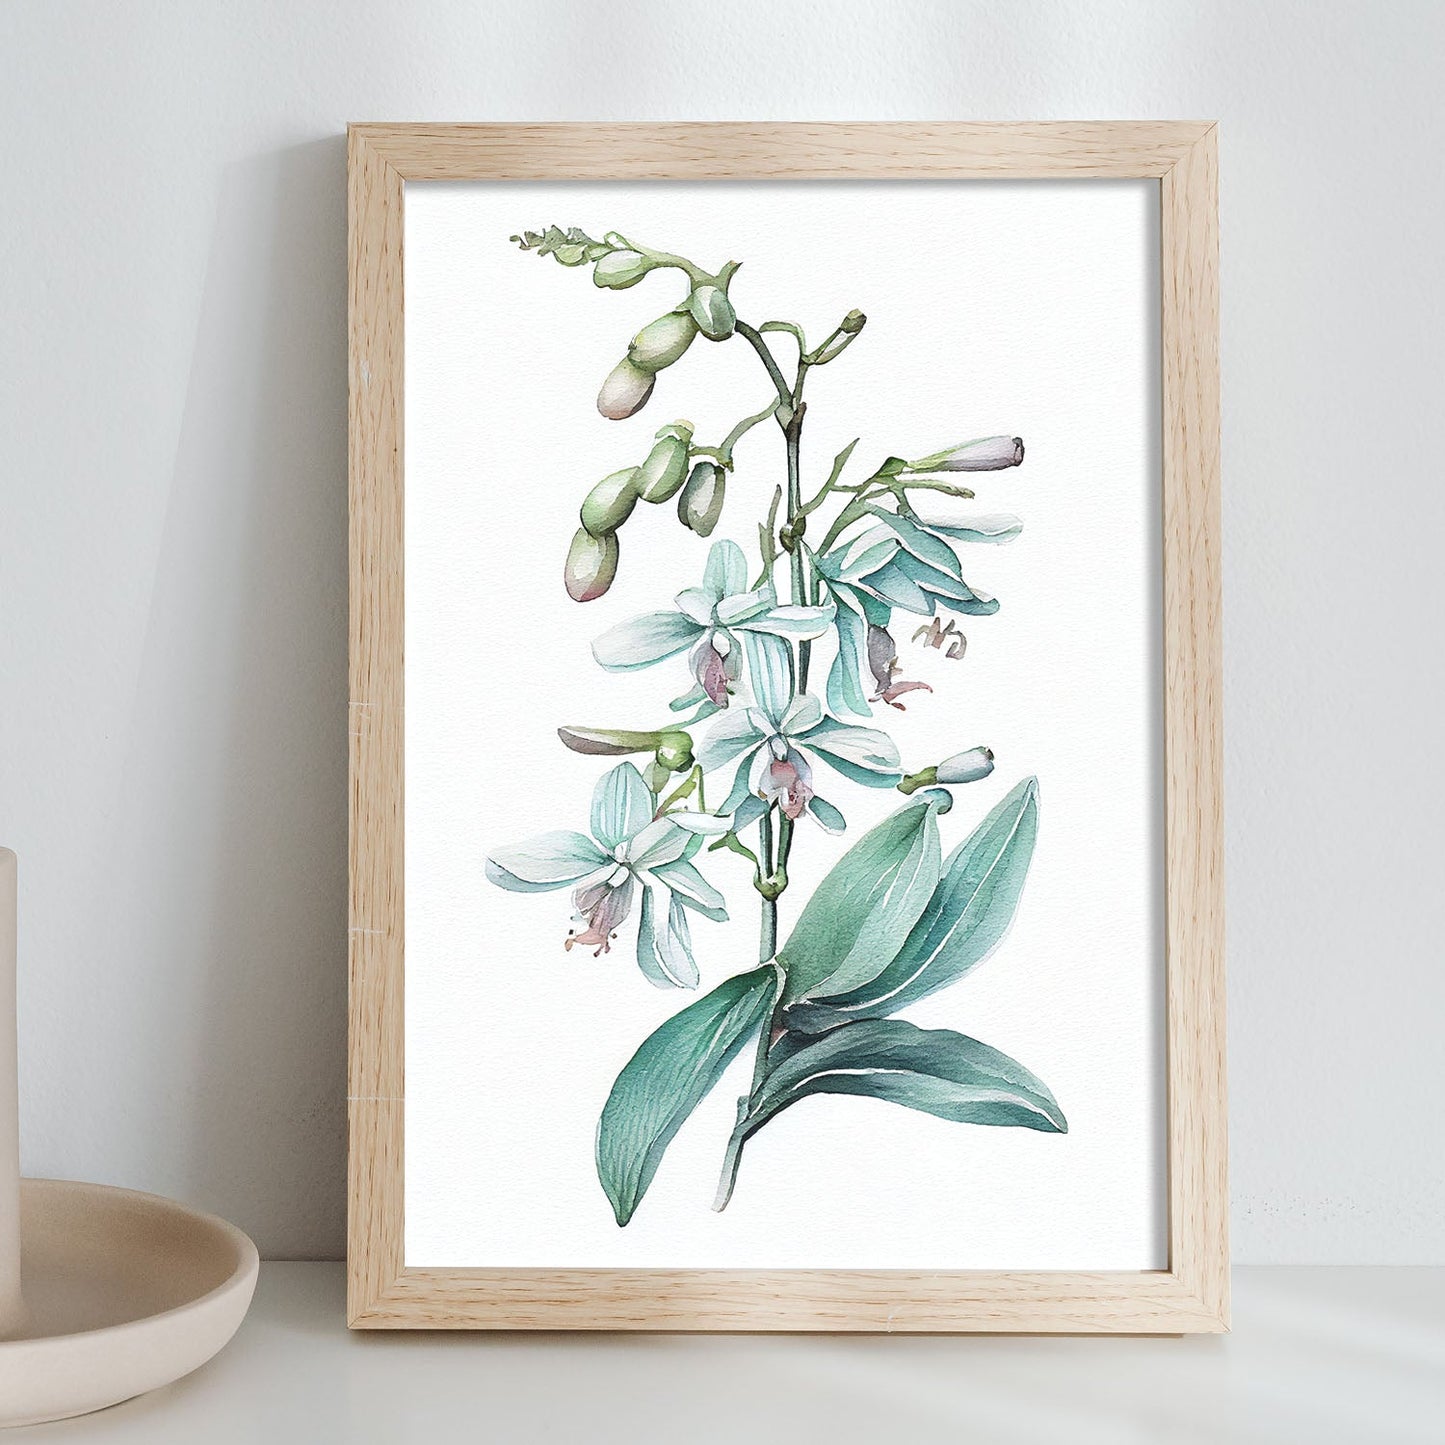 Nacnic watercolor minmal Orchid_2. Aesthetic Wall Art Prints for Bedroom or Living Room Design.